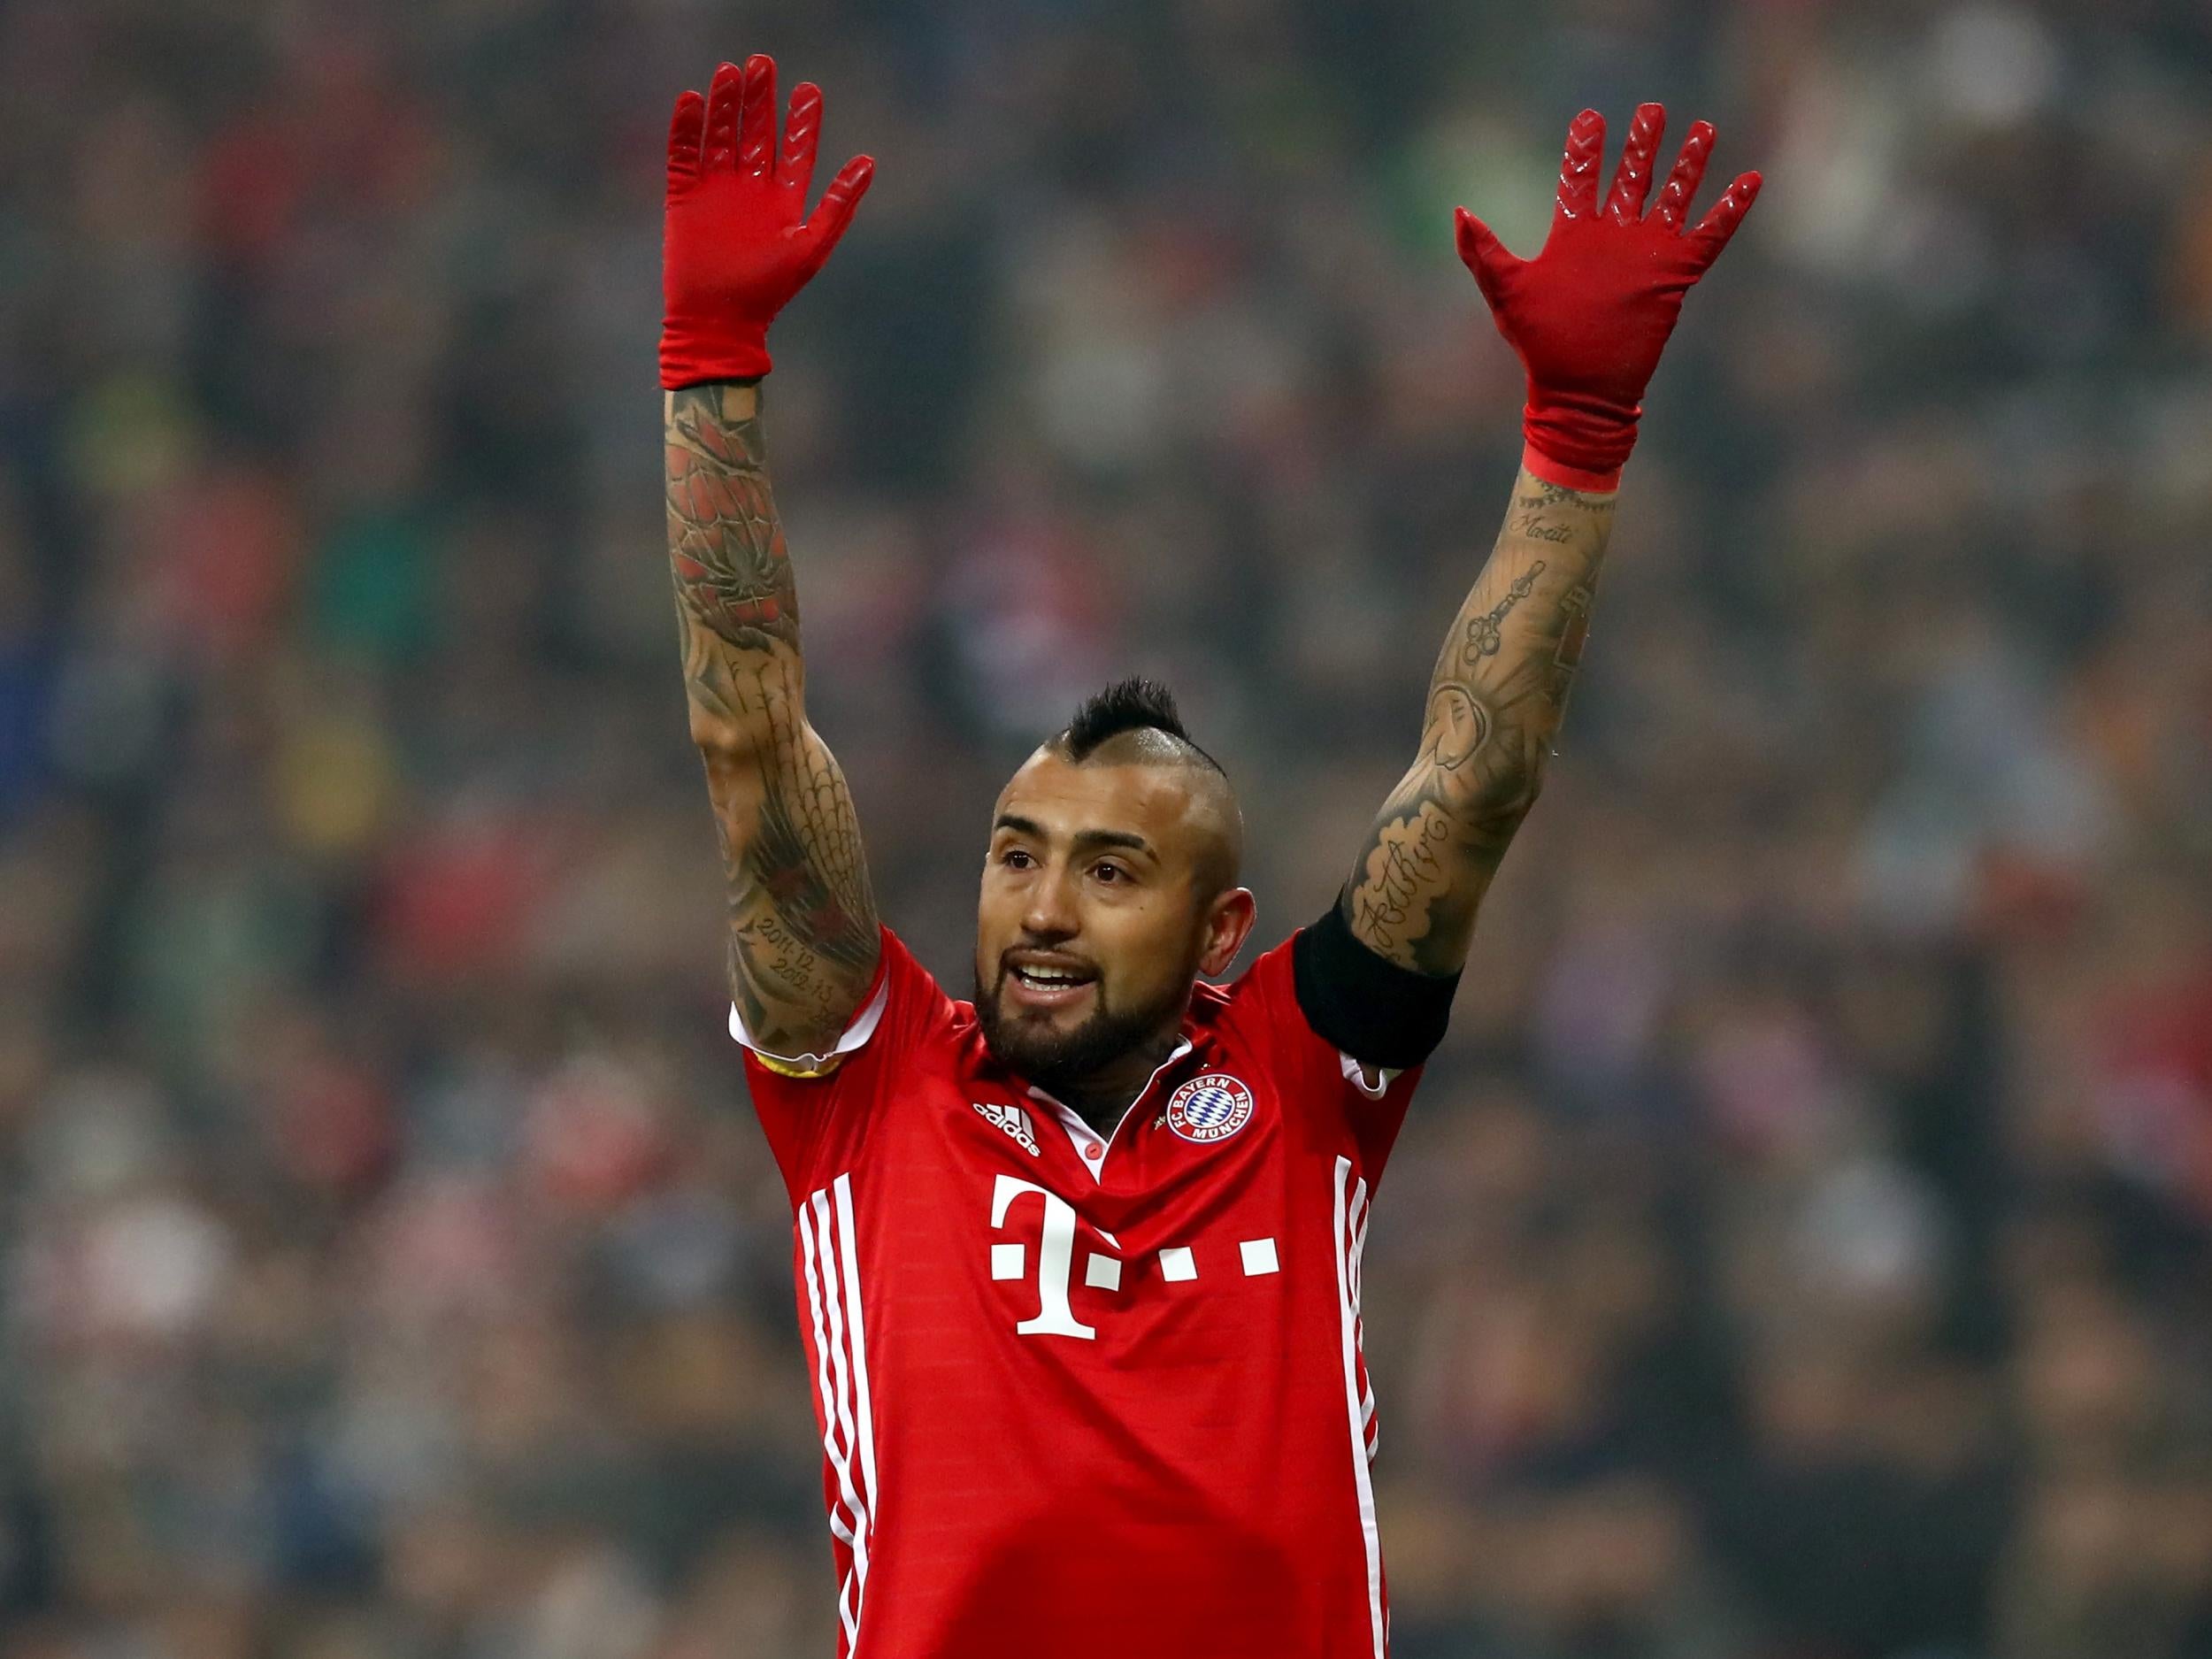 Vidal has been linked with a £40m move to Stamford Bridge